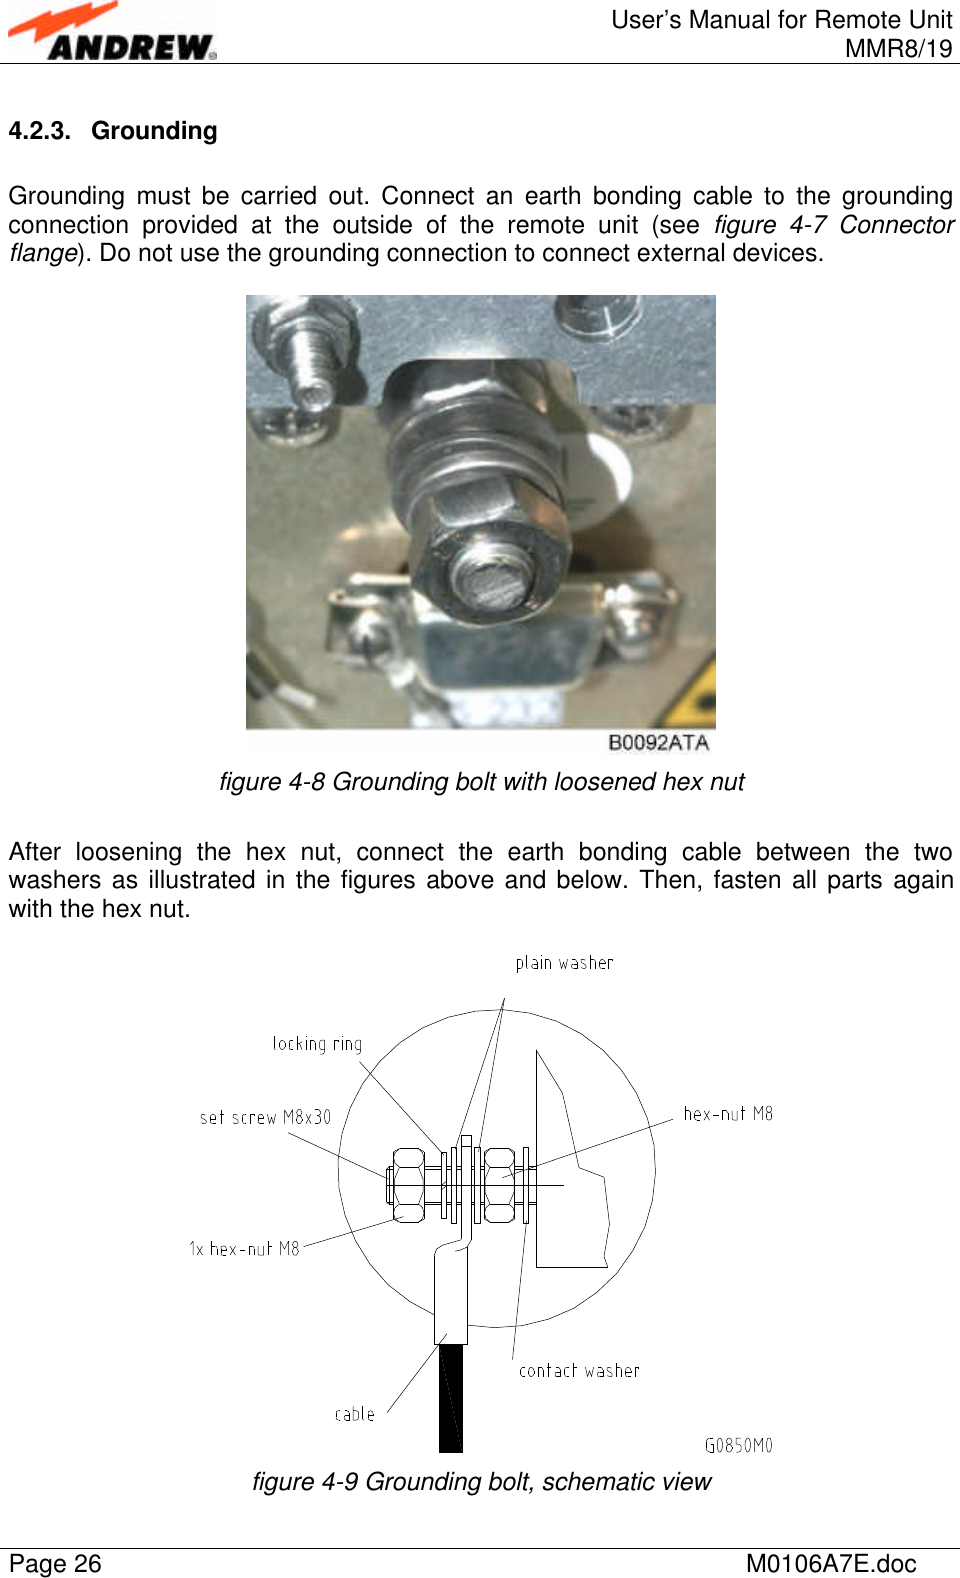 User’s Manual for Remote UnitMMR8/19Page 26 M0106A7E.doc4.2.3. GroundingGrounding must be carried out. Connect an earth bonding cable to the groundingconnection provided at the outside of the remote unit (see figure  4-7 Connectorflange). Do not use the grounding connection to connect external devices.figure 4-8 Grounding bolt with loosened hex nutAfter loosening the hex nut, connect the earth bonding cable between the twowashers as illustrated in the figures above and below. Then, fasten all parts againwith the hex nut.figure 4-9 Grounding bolt, schematic view